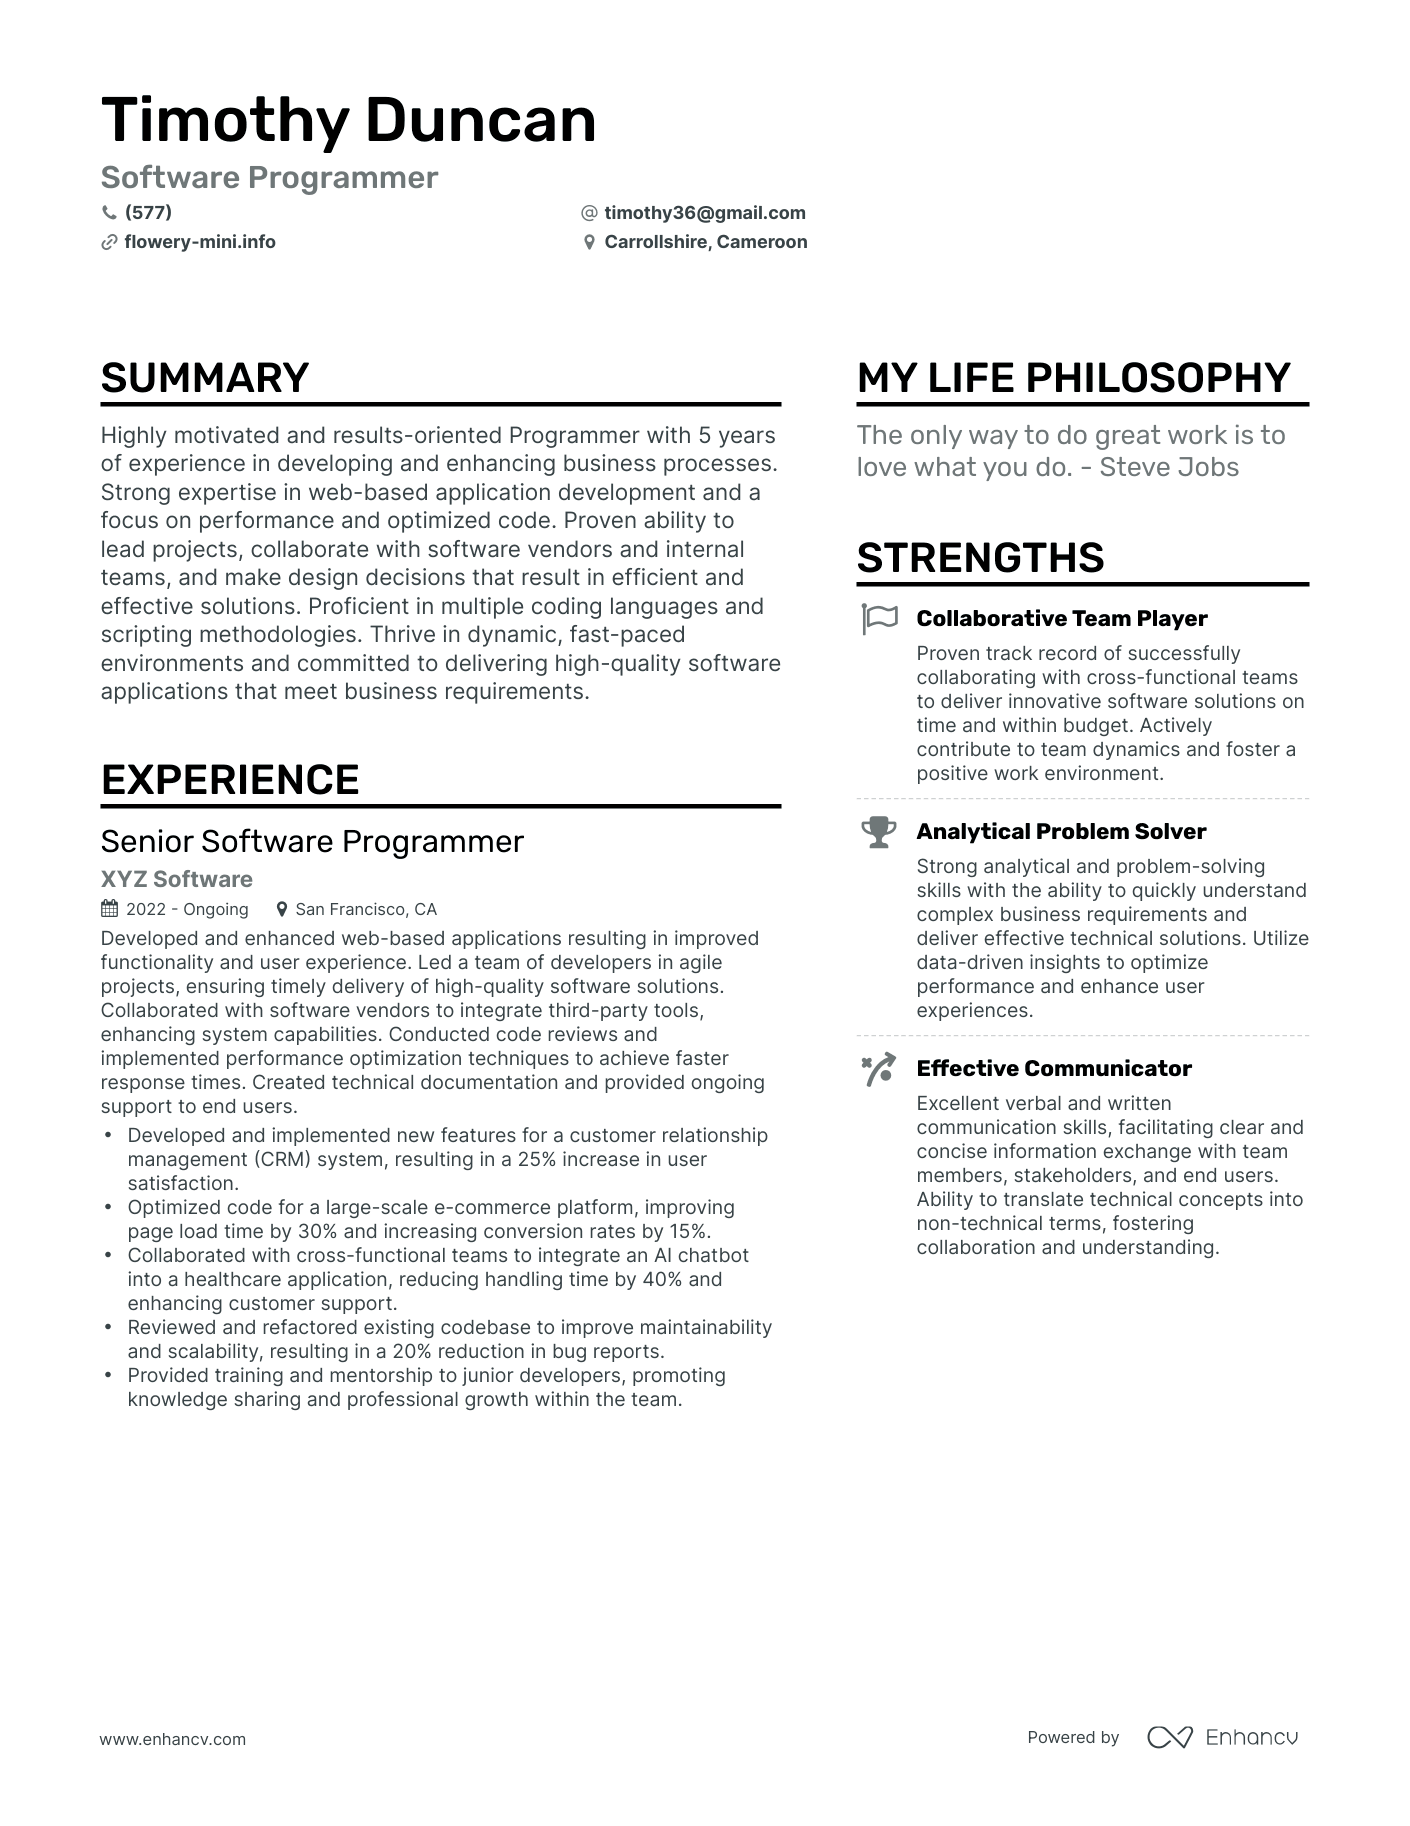 Software Programmer resume example